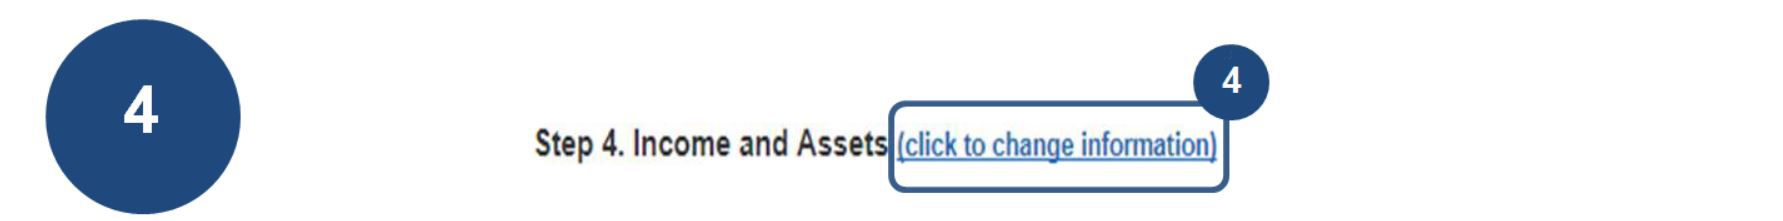 4. To edit your form, select the click to change information link at each step (Step 4 Income and Assets).